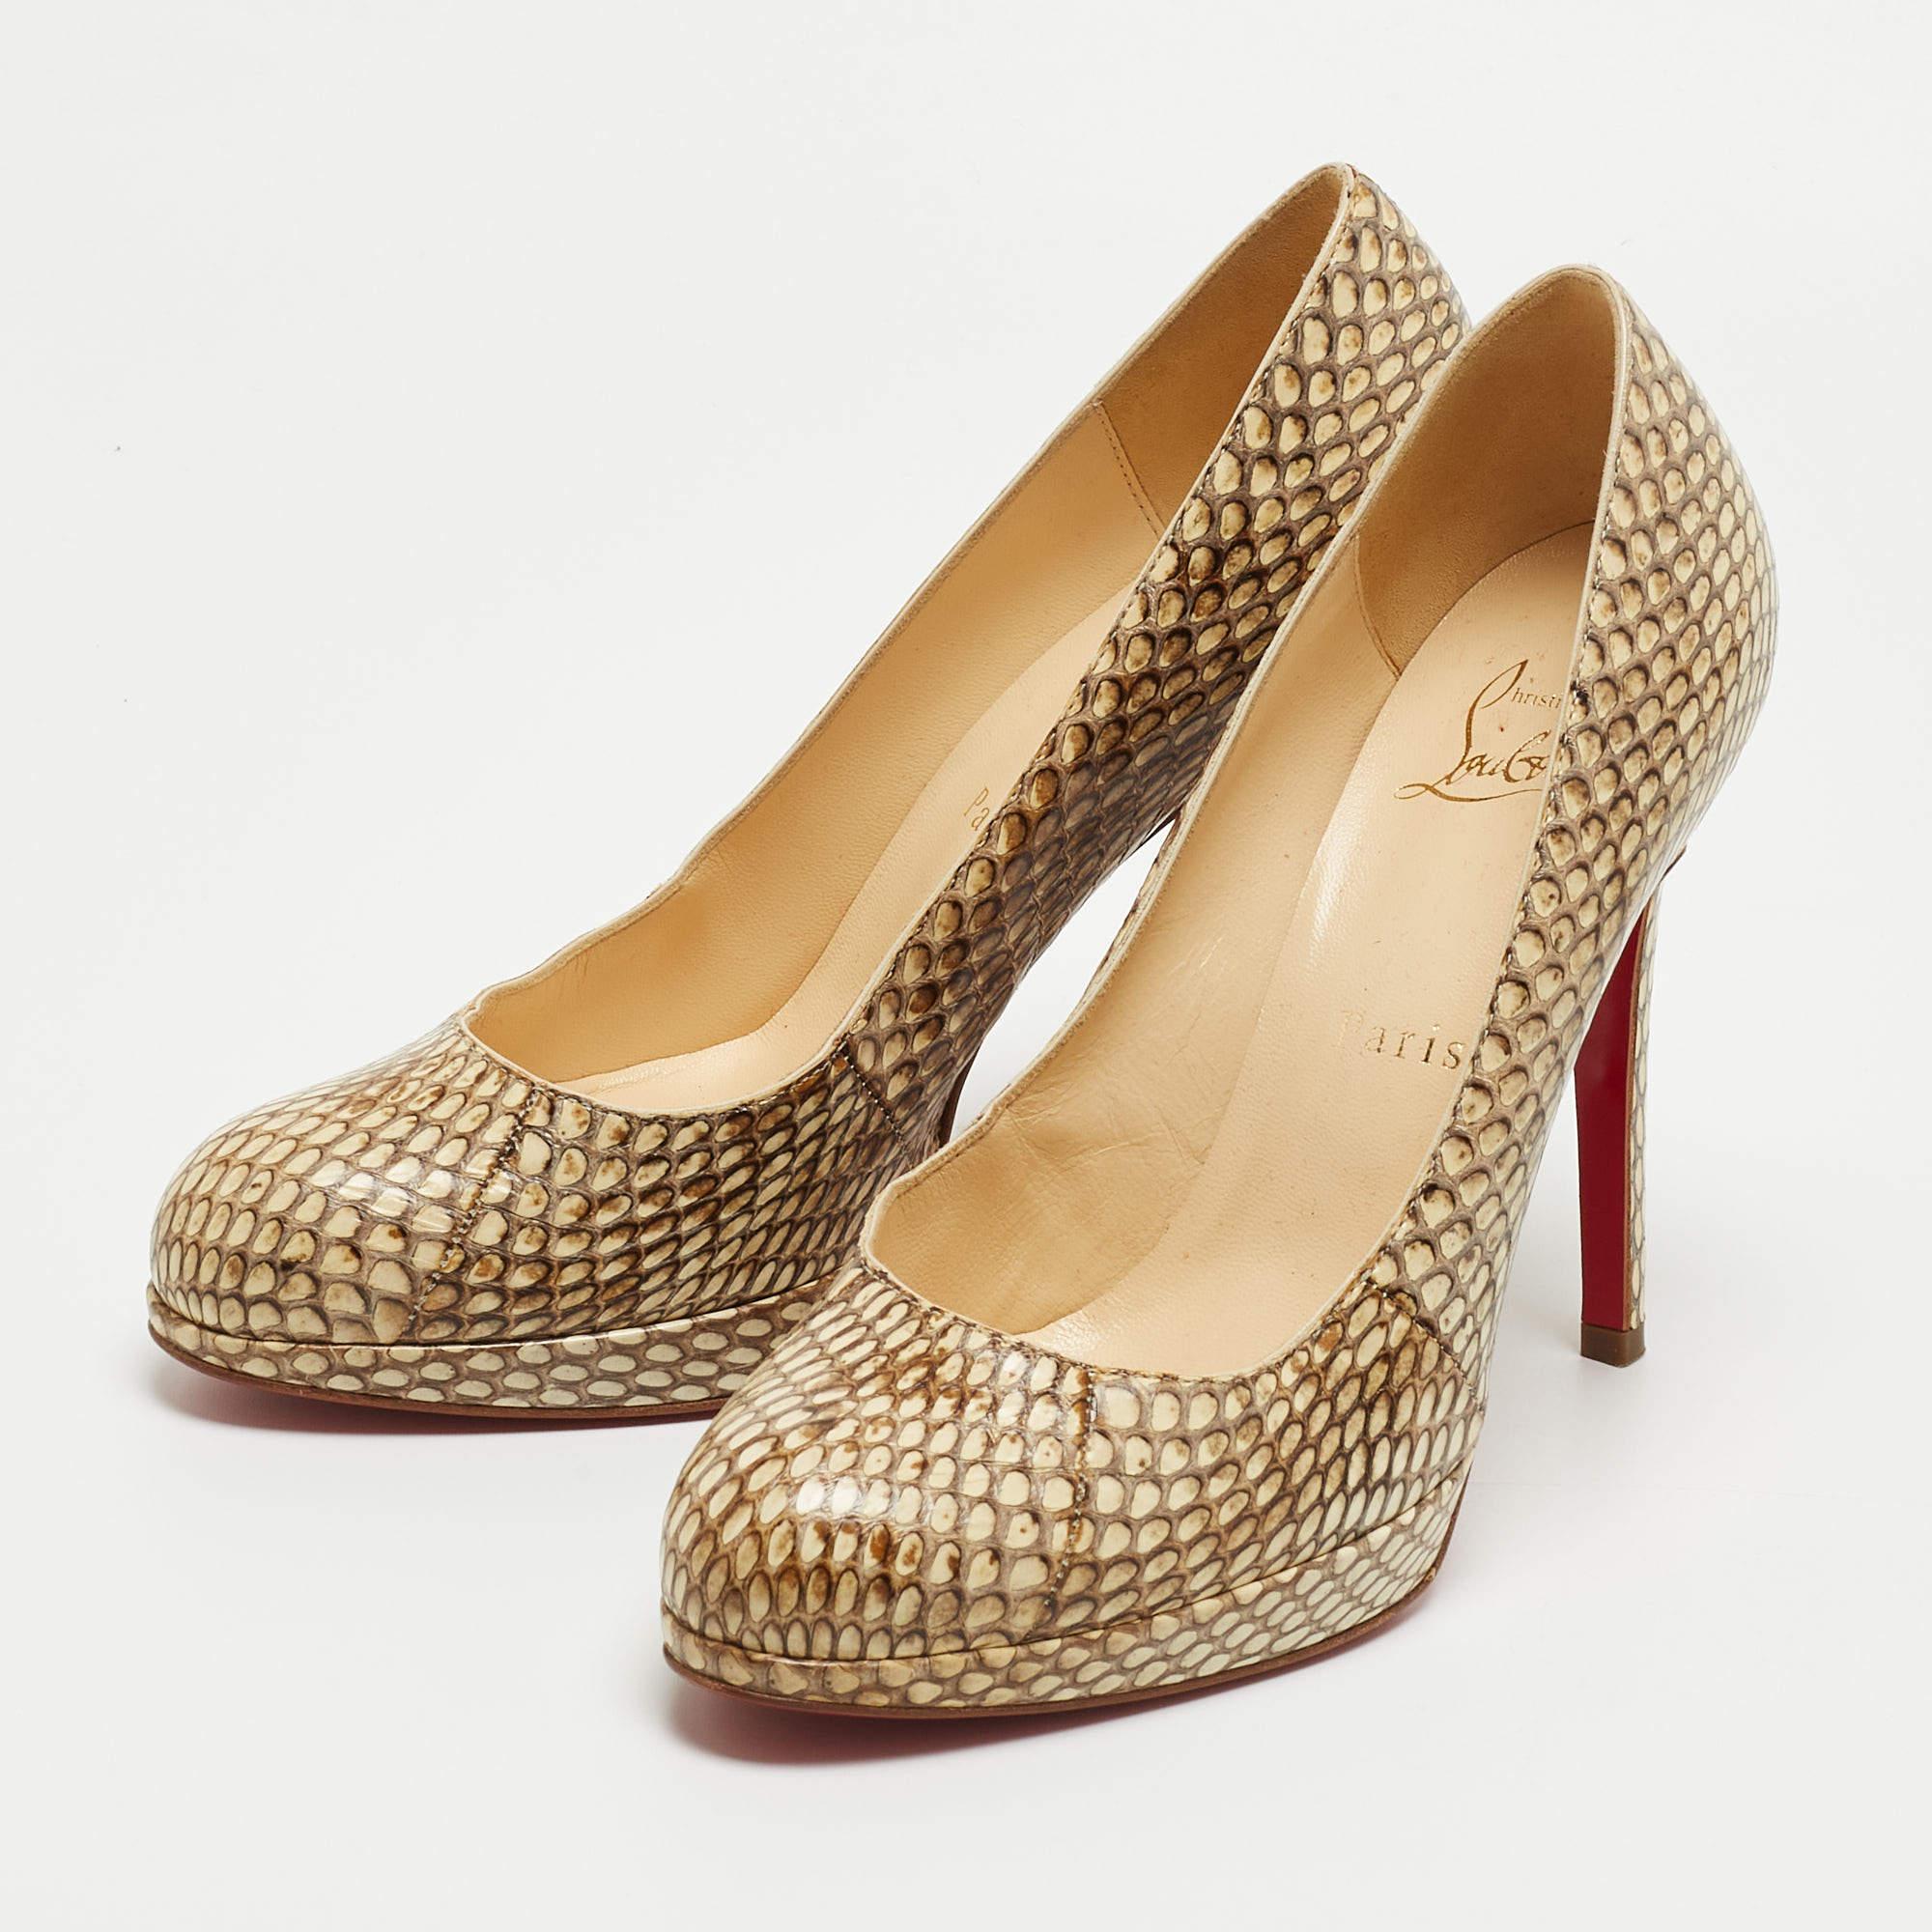 Christian Louboutin Beige Python Leather New Simple Round Toe Pumps Size 36.5 In Good Condition For Sale In Dubai, Al Qouz 2